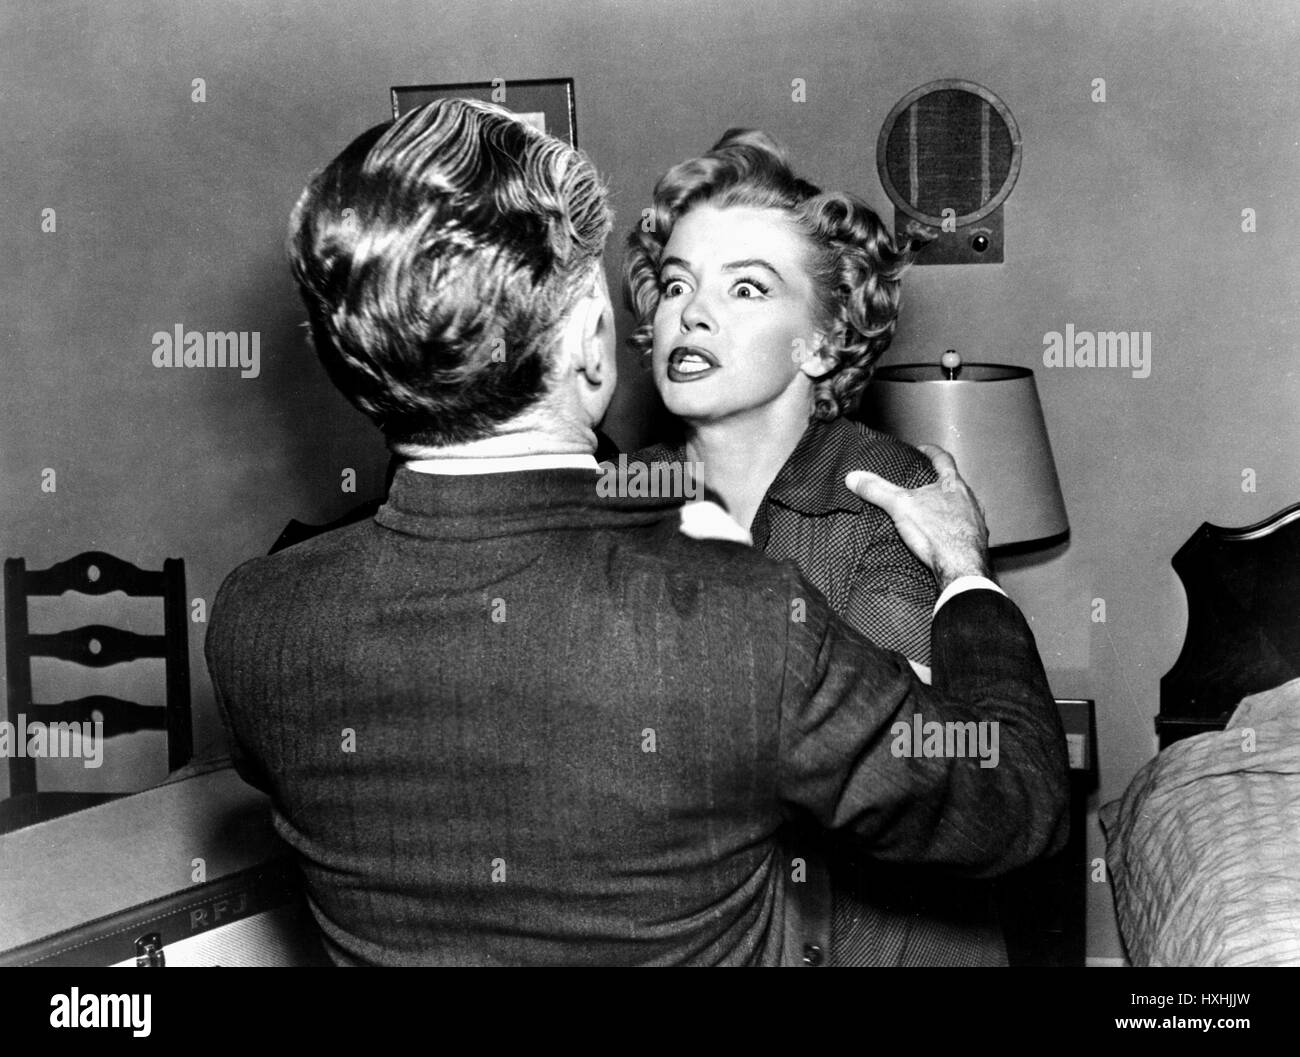 Marilyn monroe Black and White Stock Photos & Images - Alamy